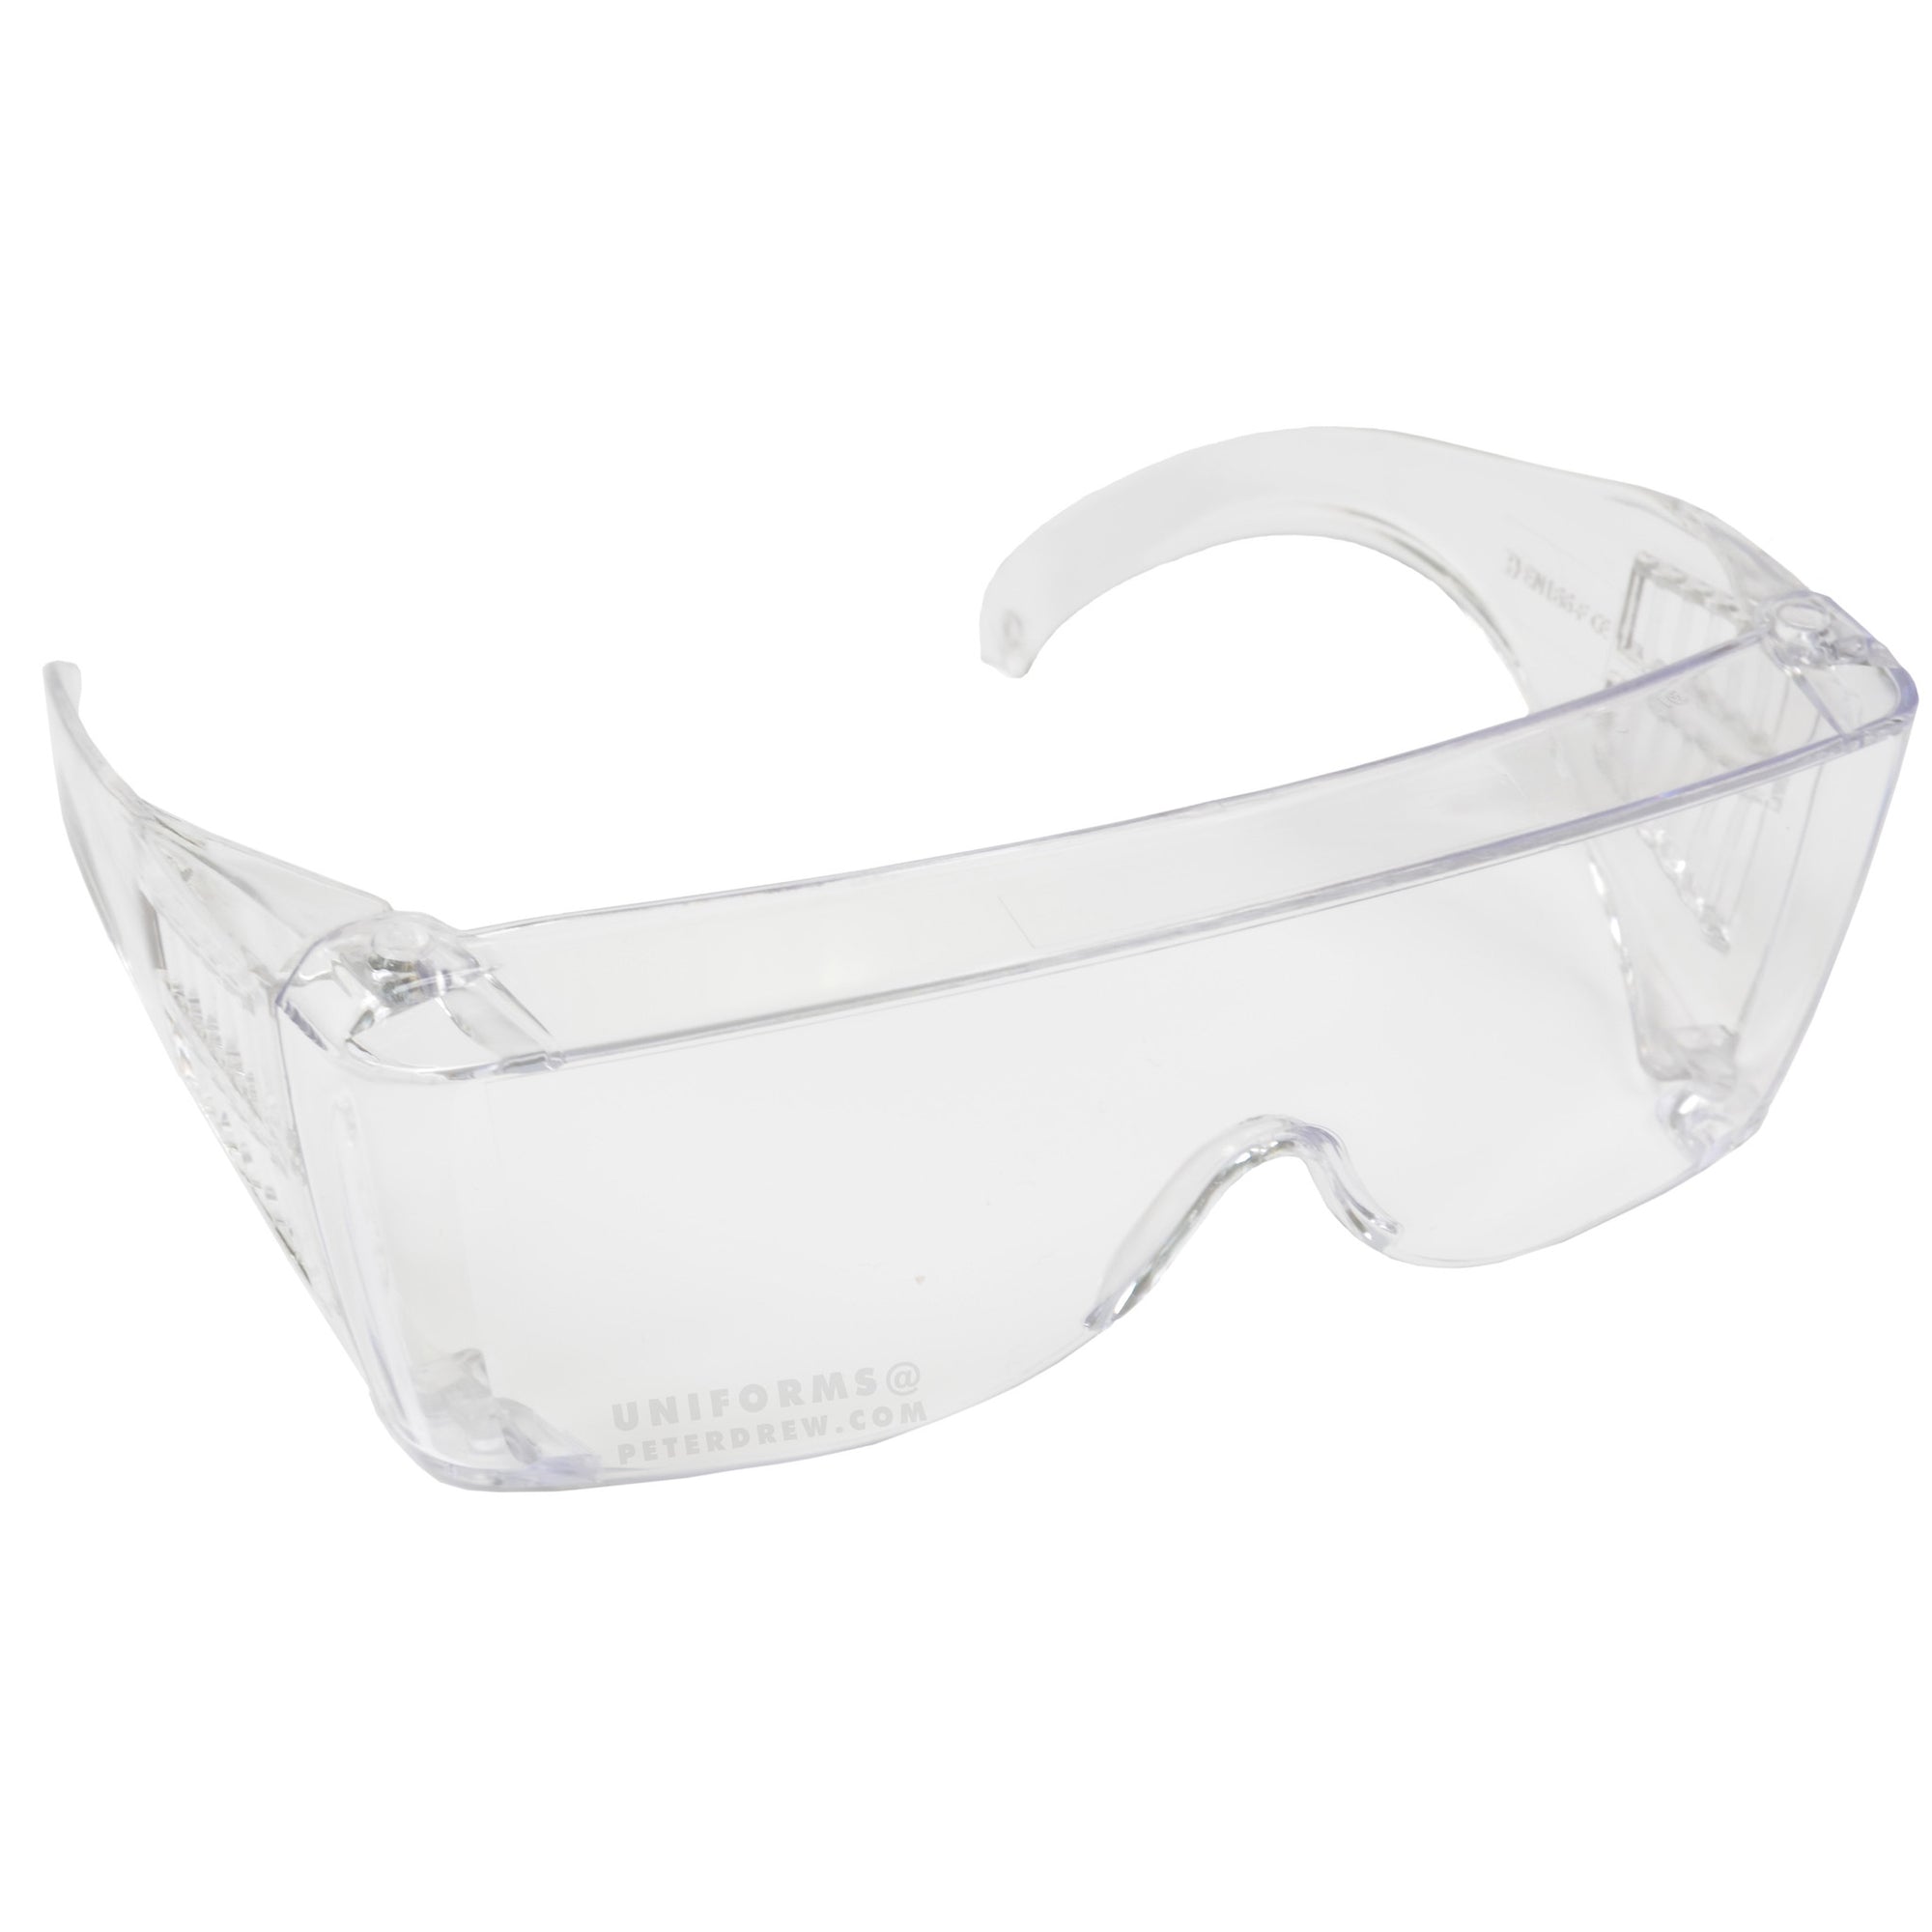 Safety Goggles - peterdrew.com
